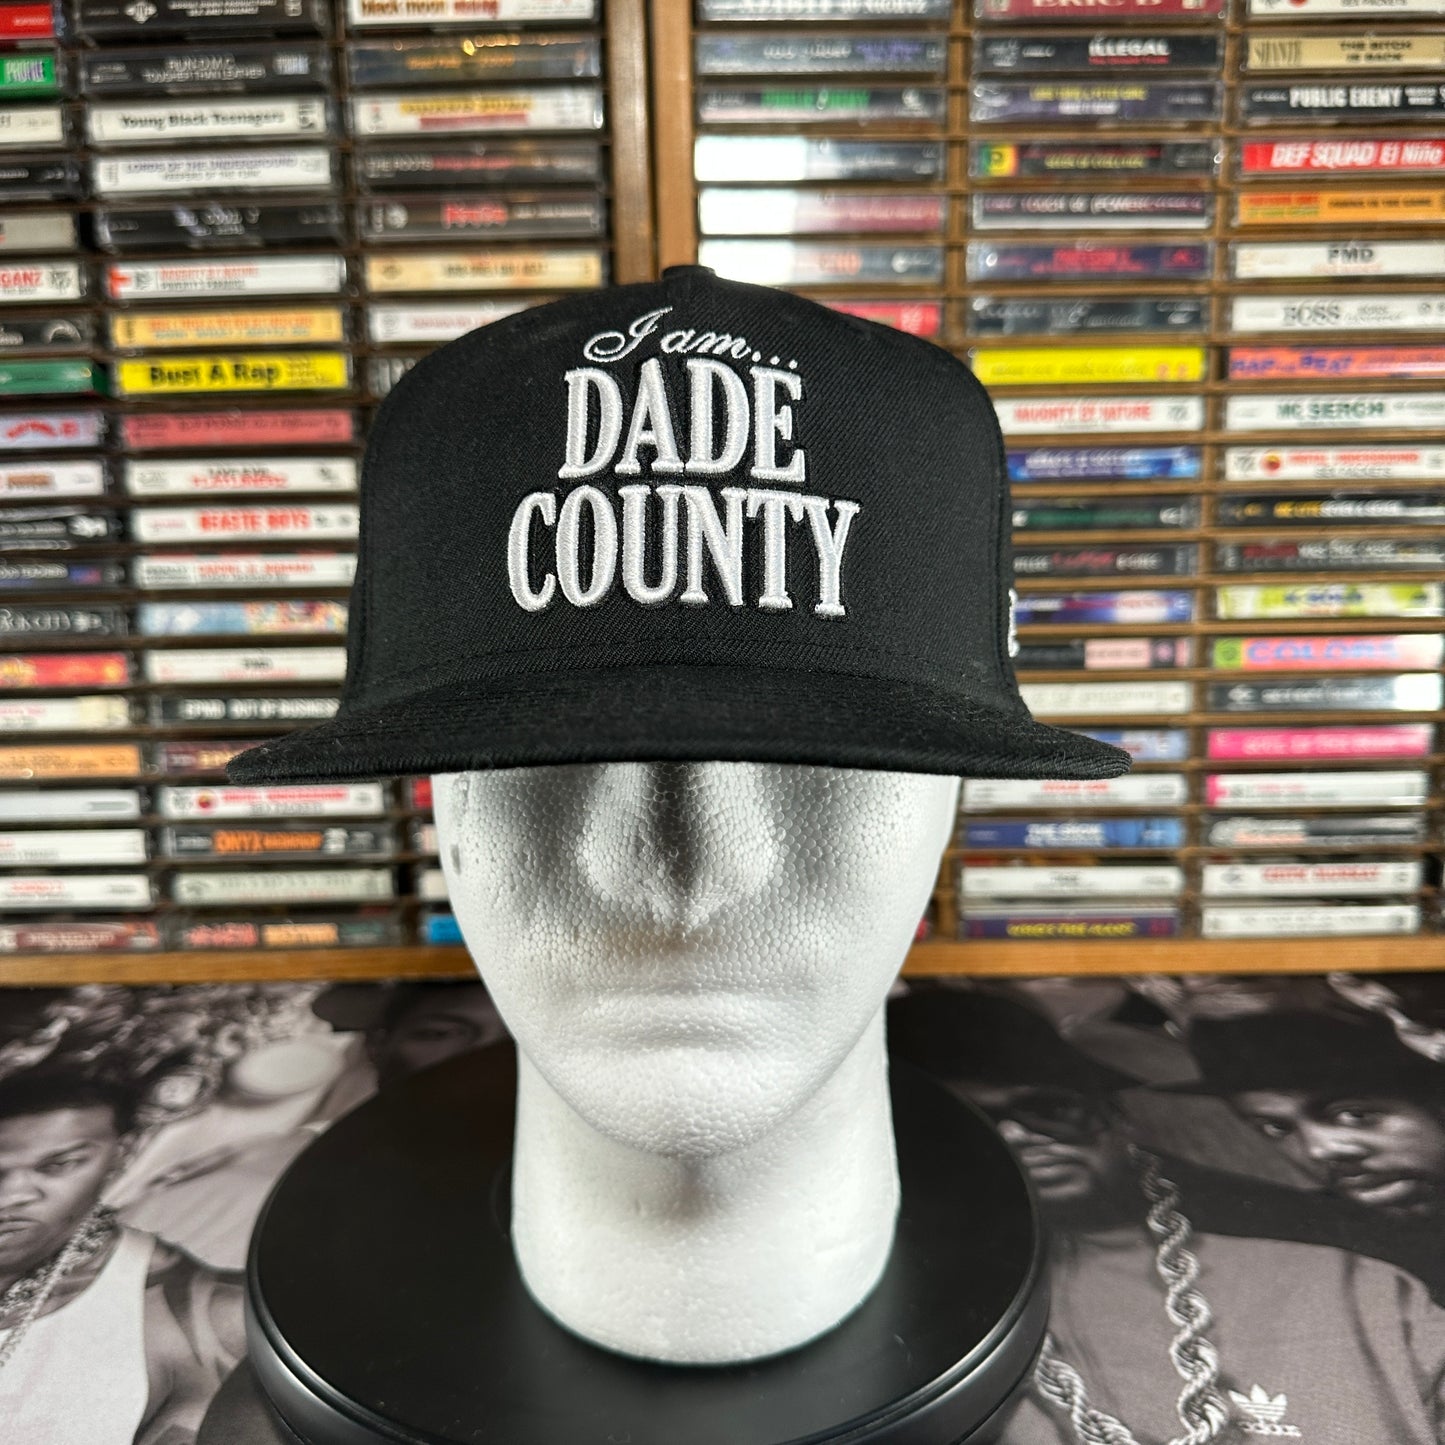 New Era I Am Dade County Fitted Hat Size 7